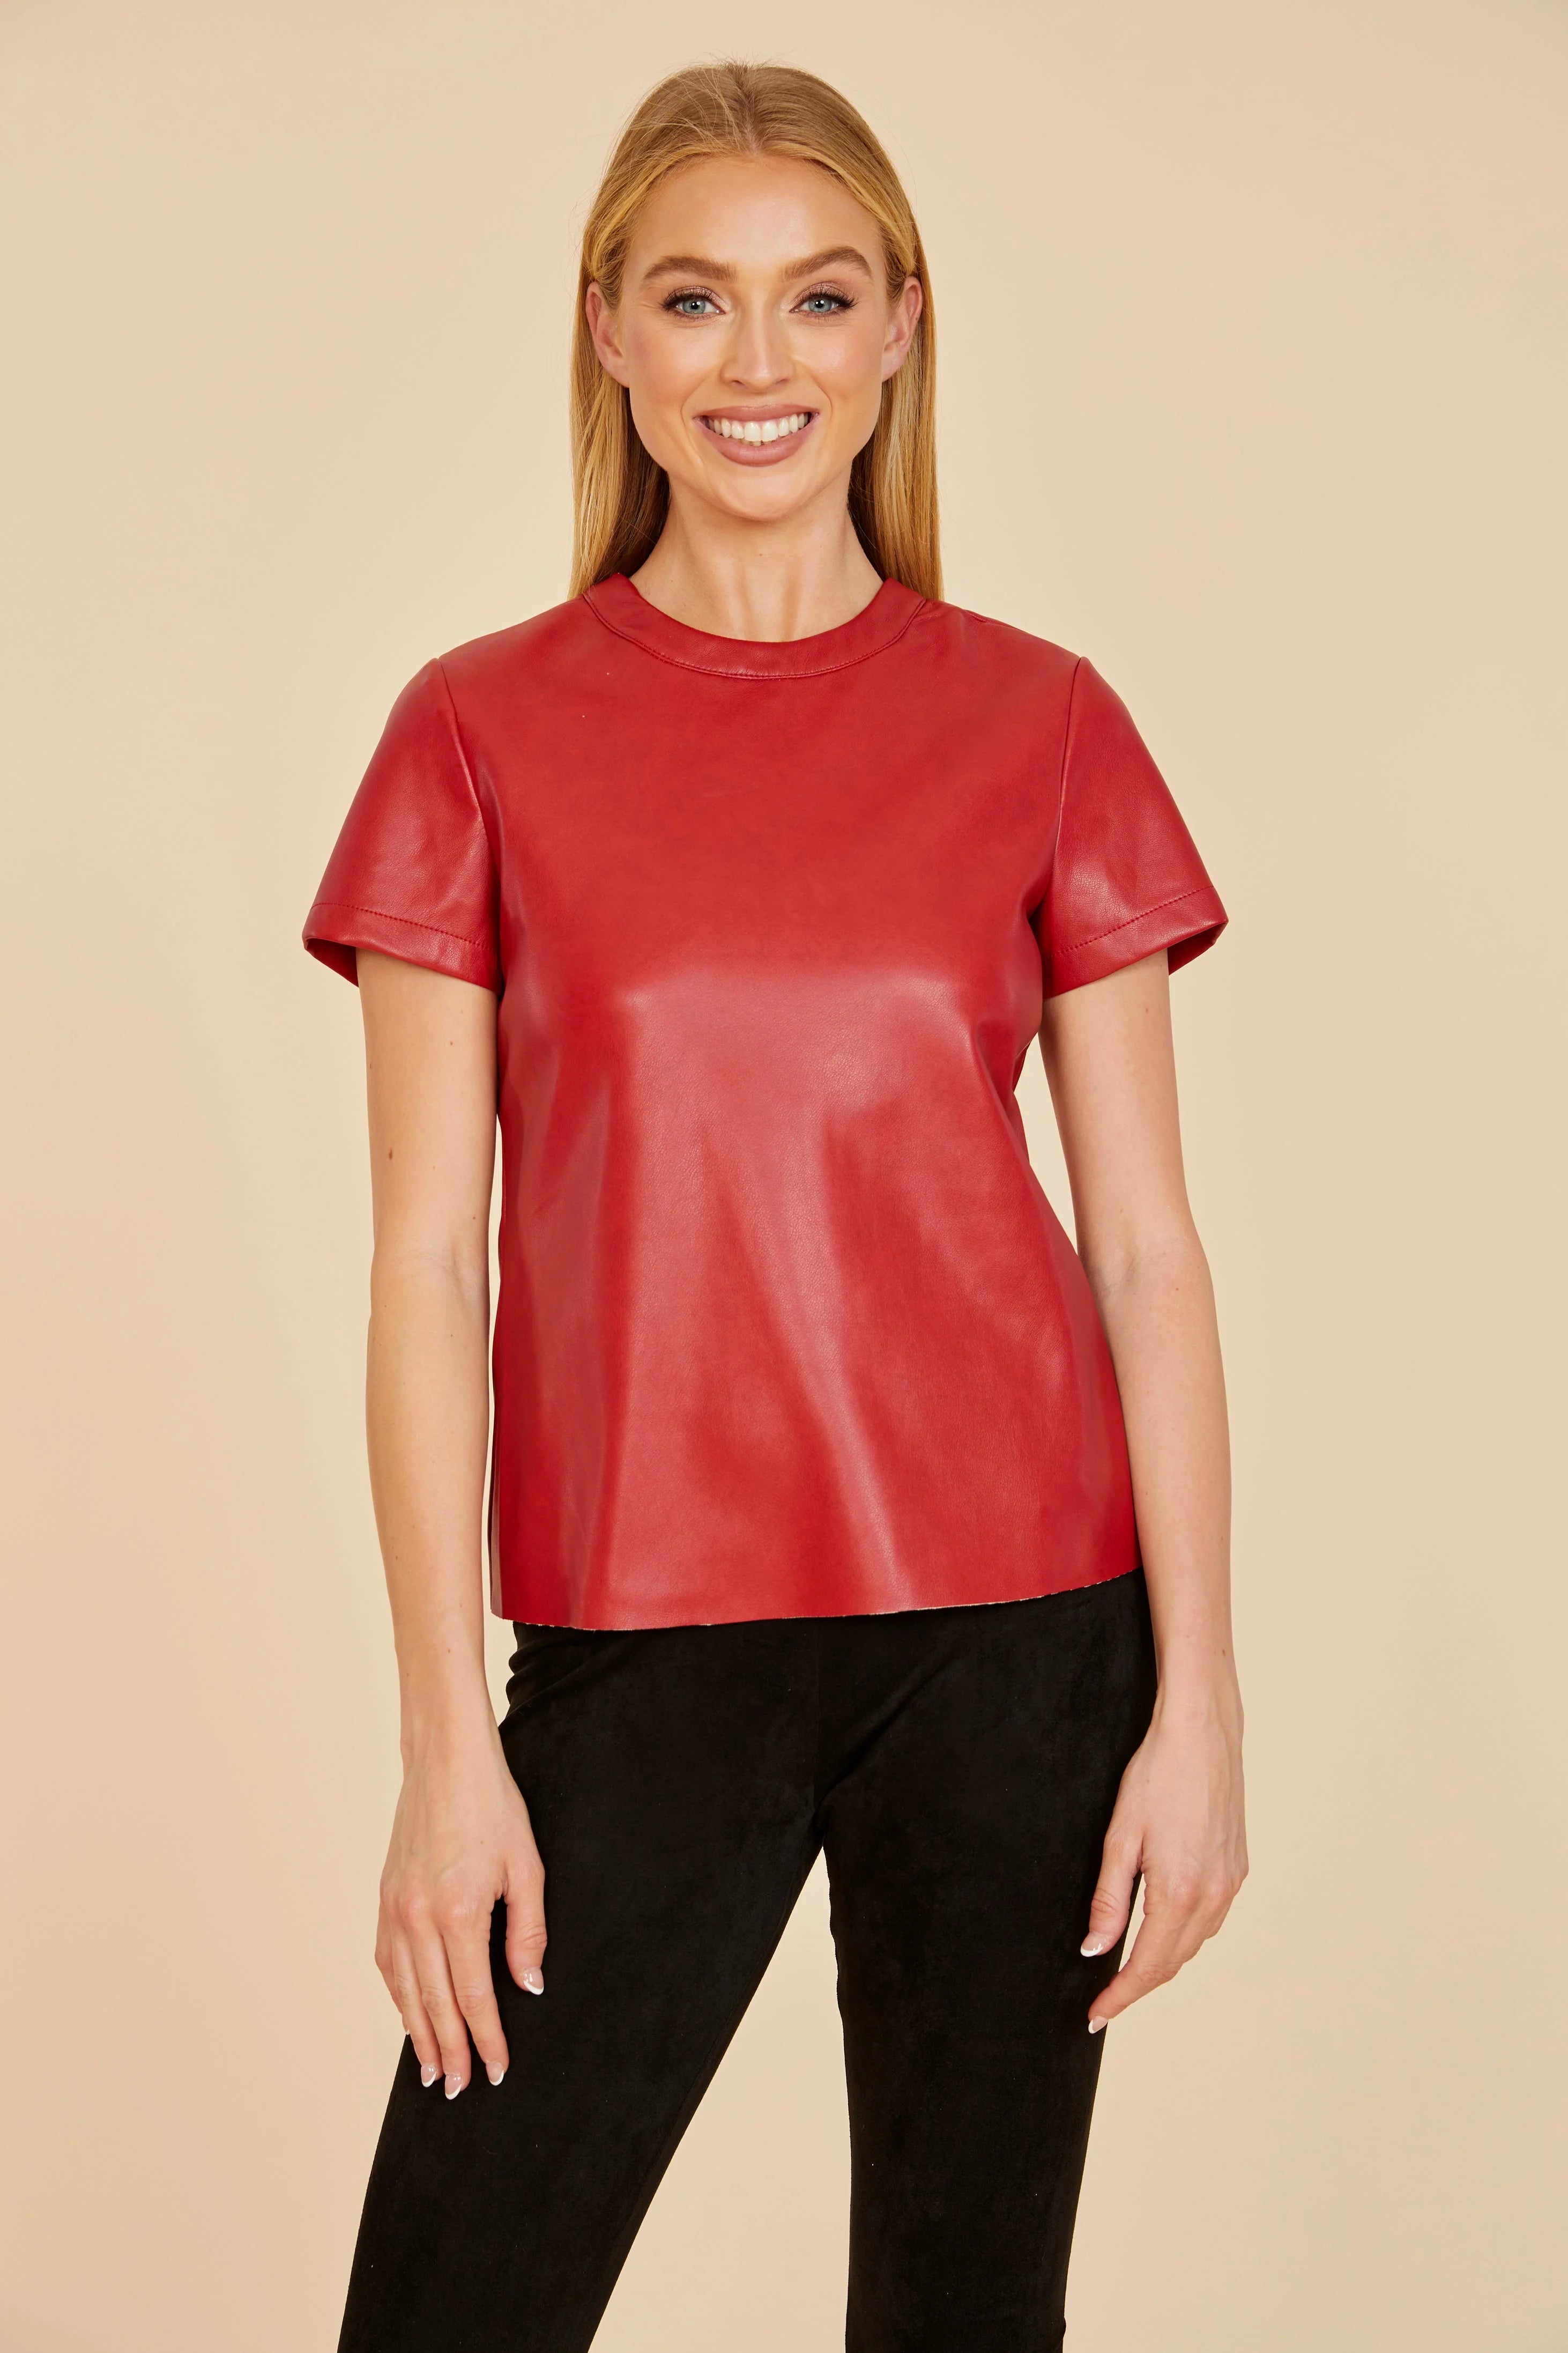 Faux Leather TShirt by Dolce Cabo